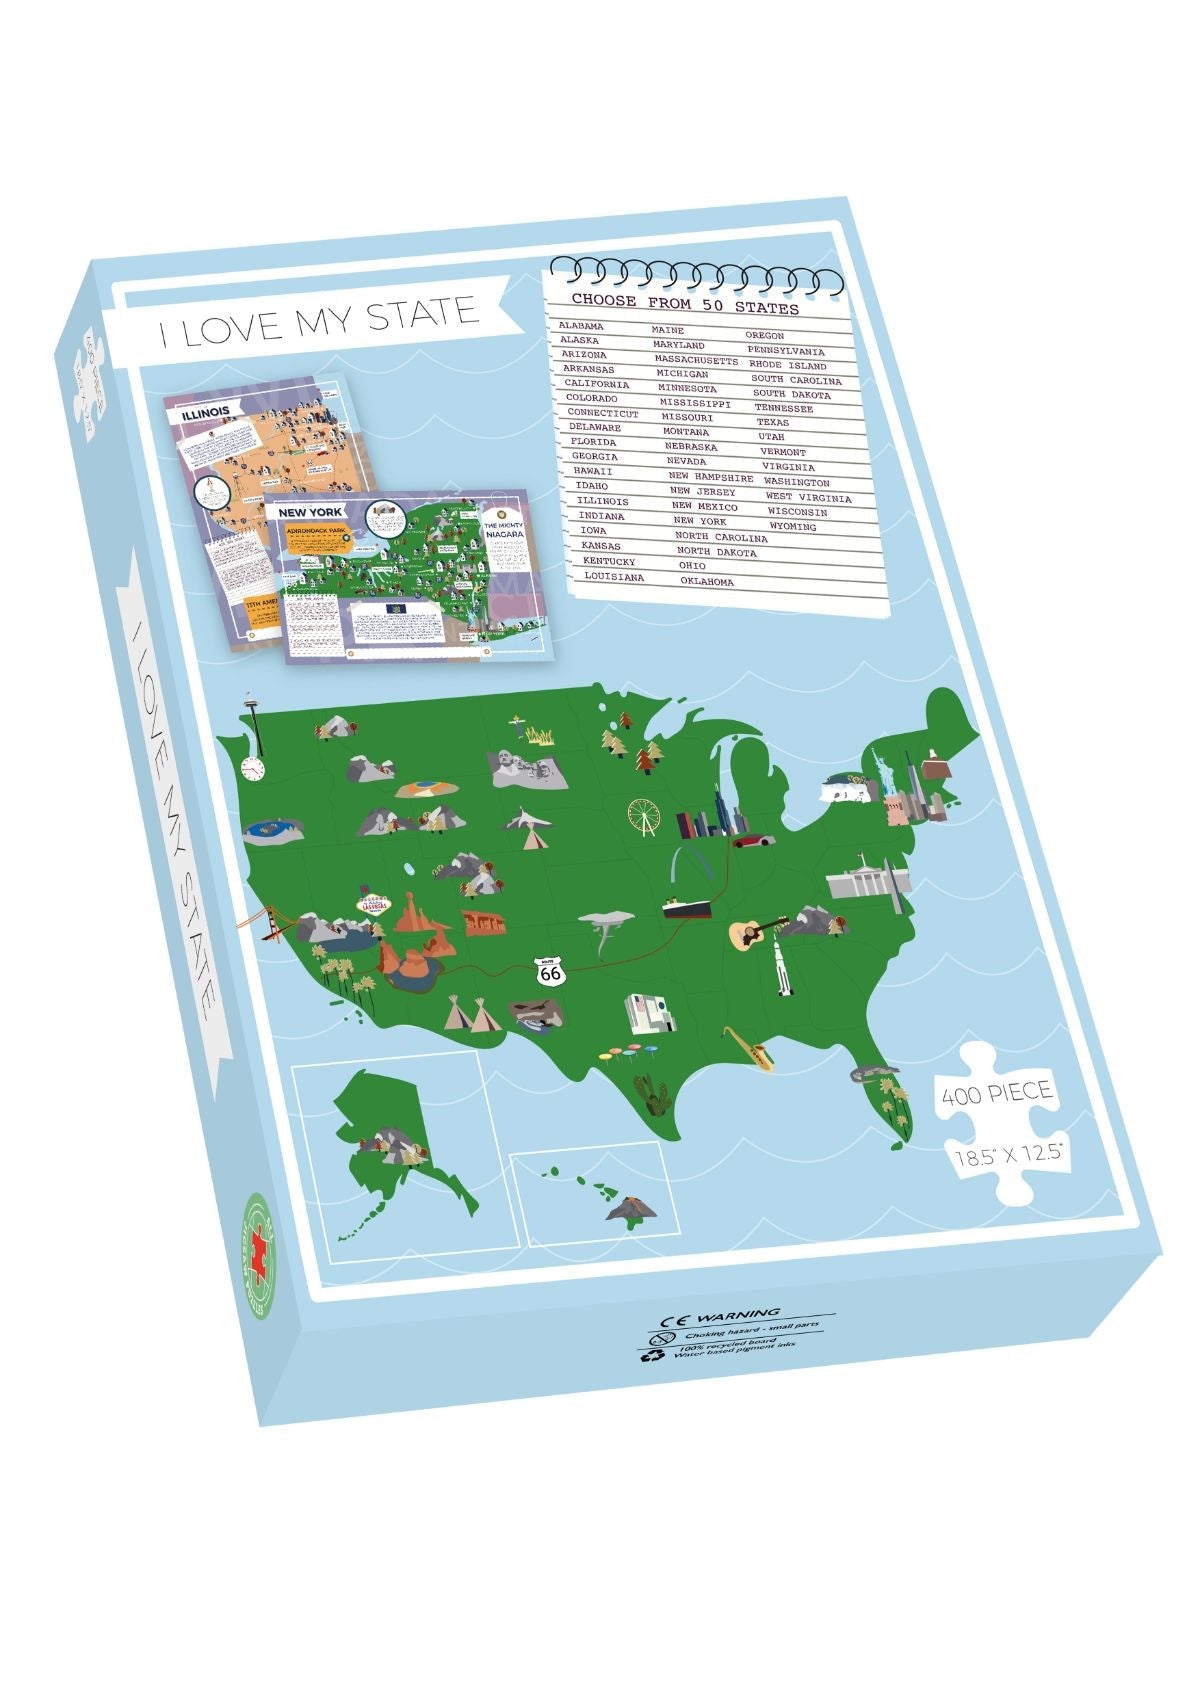 Connecticut - I Love My State 400 Piece Personalized Jigsaw Puzzle